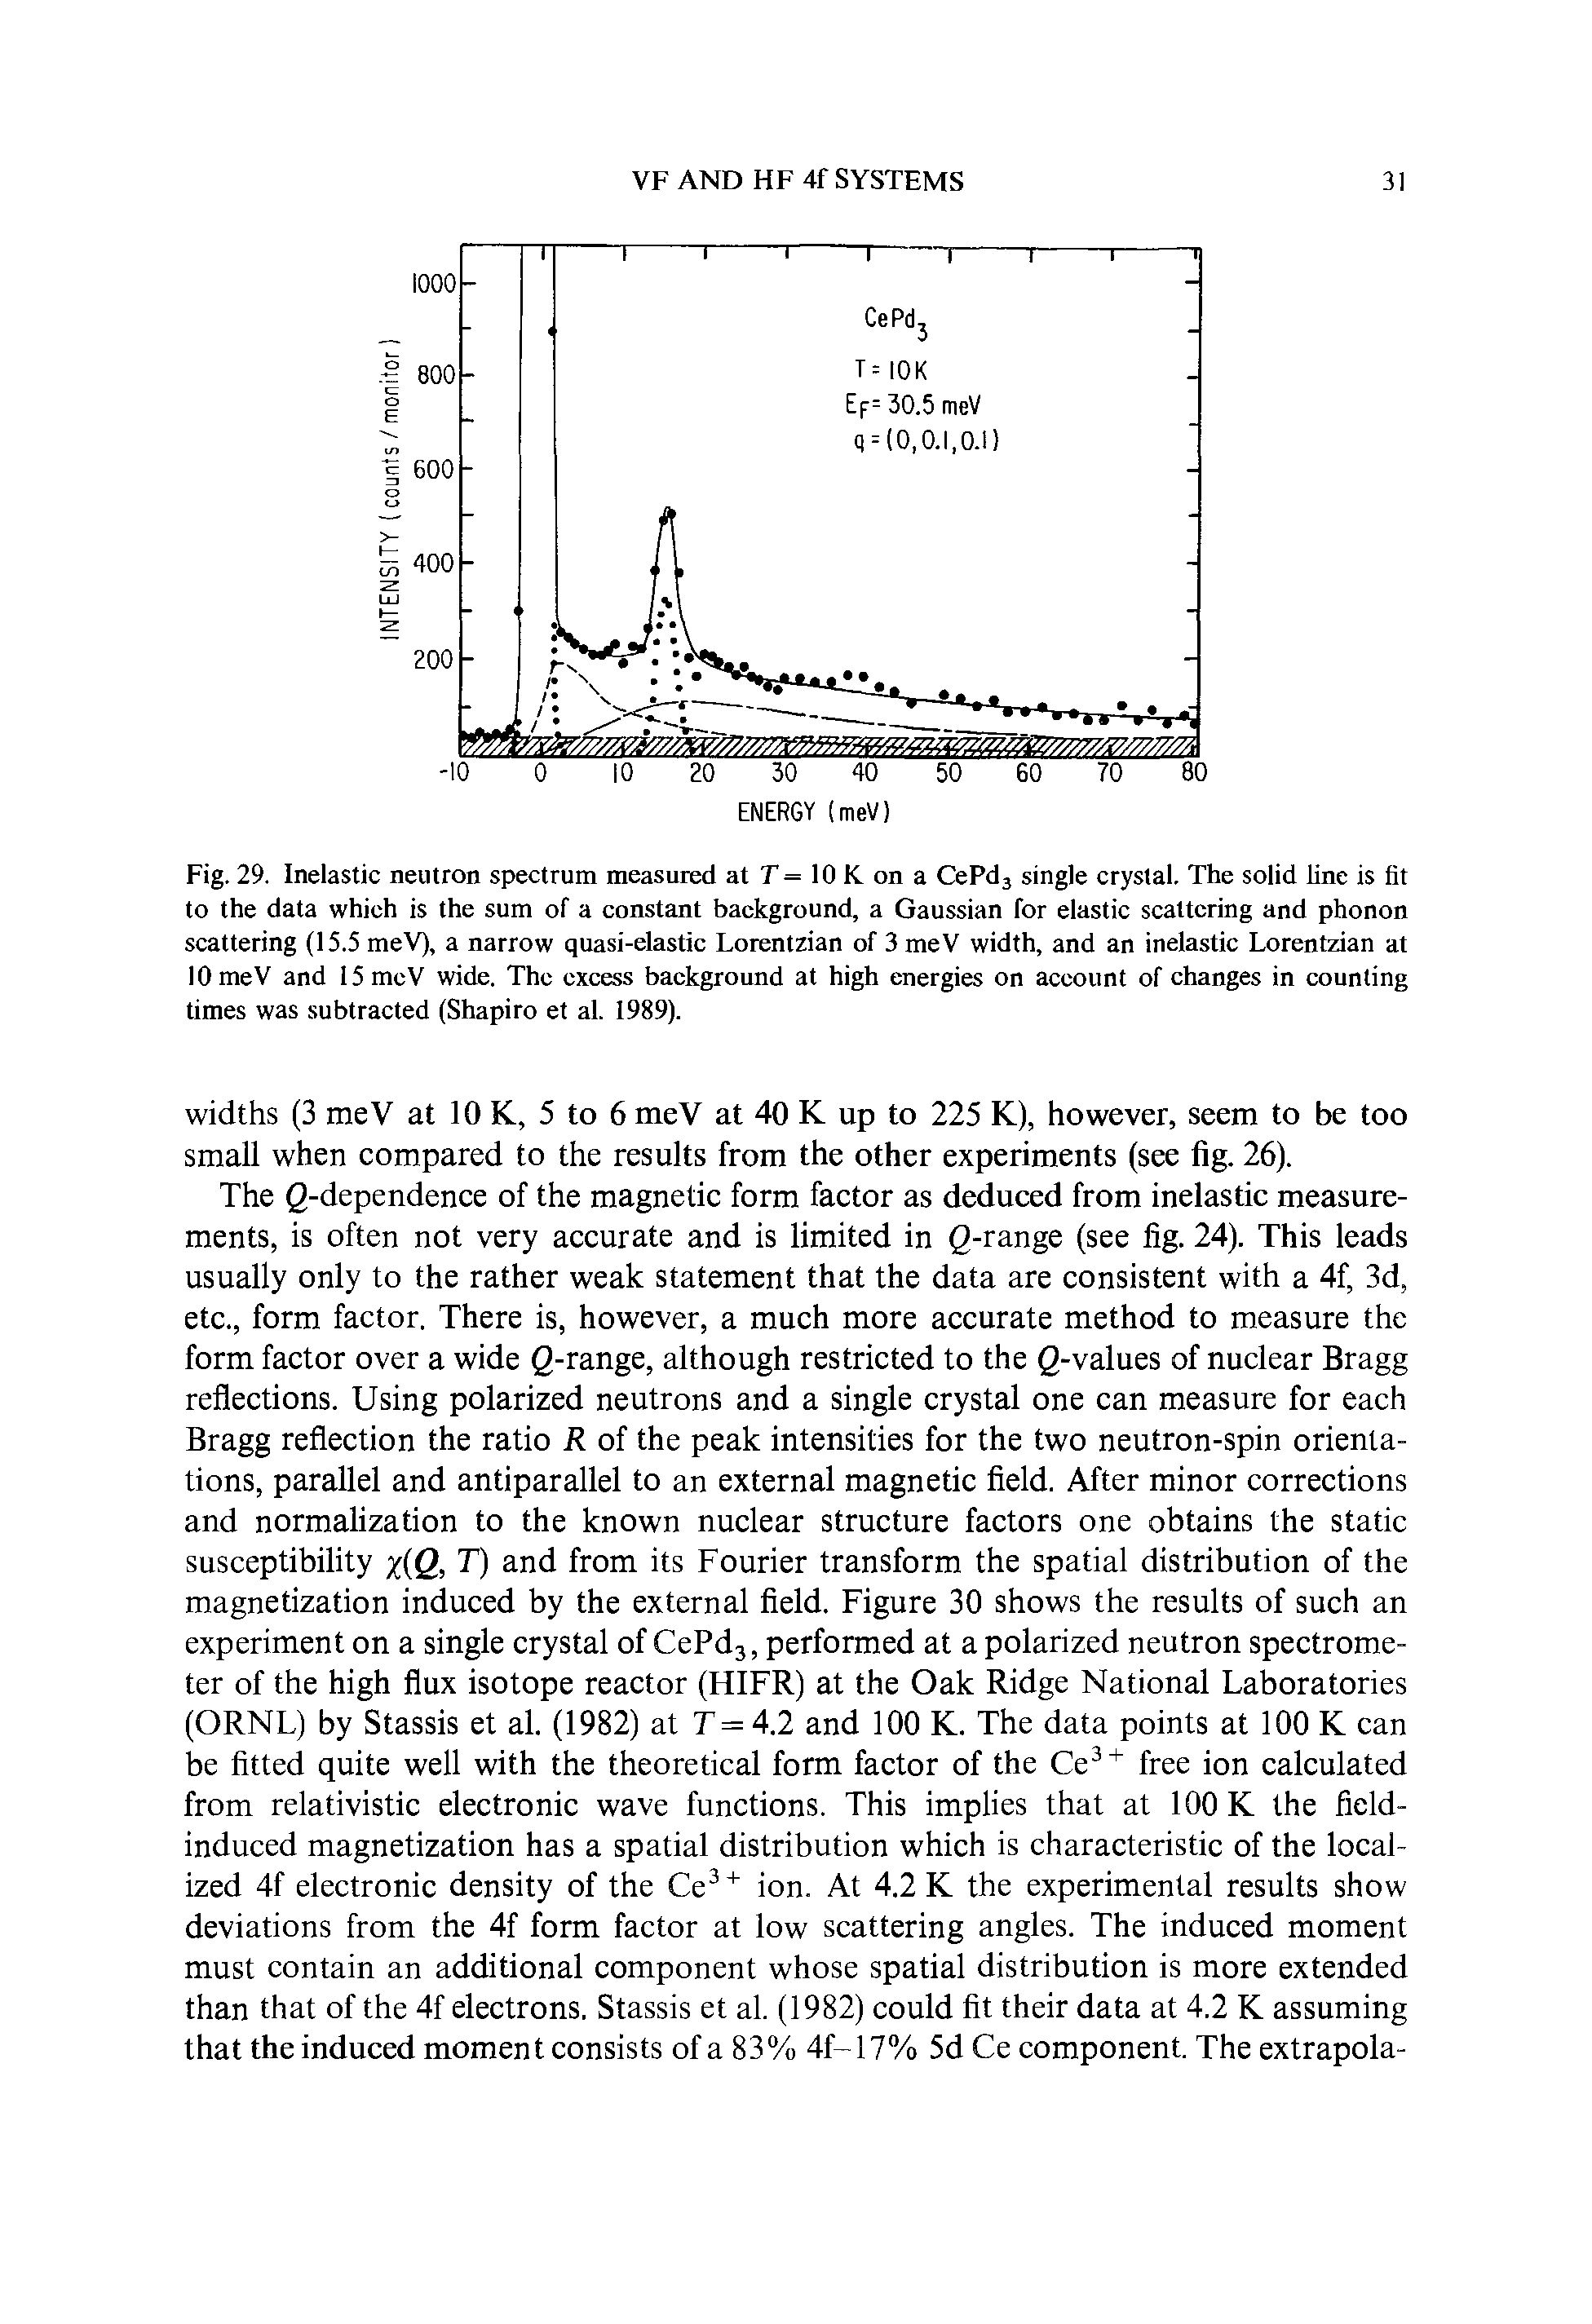 Fig. 29. Inelastic neutron spectrum measured at T= 10 K on a CePdj single crystal. The solid line is fit to the data which is the sum of a constant background, a Gaussian for elastic scattering and phonon scattering (15.5 meV), a narrow quasi-elastic Lorentzian of 3 meV width, and an inelastic Lorentzian at lOmeV and 15mcV wide. The excess background at high energies on account of changes in counting times was subtracted (Shapiro et al. 1989).